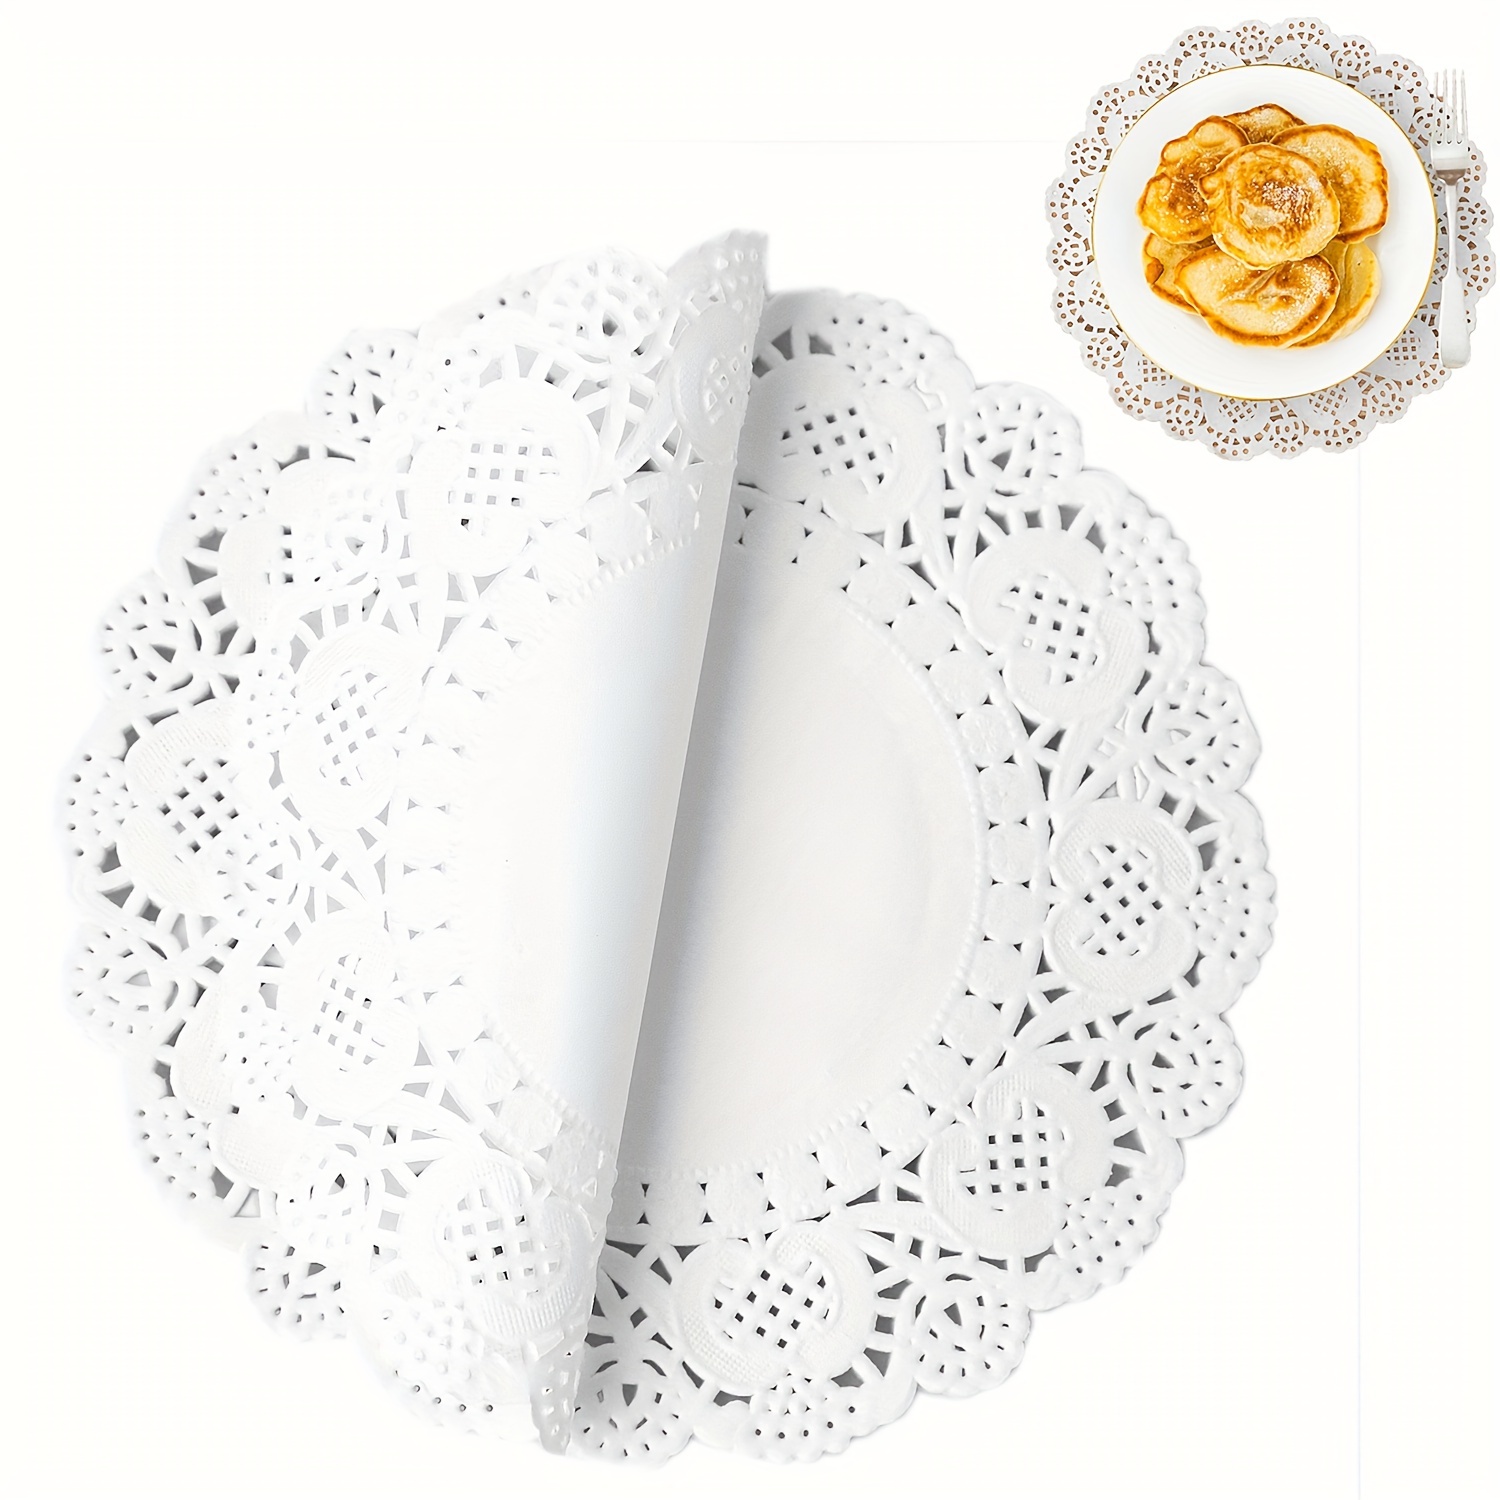 School Smart Round Paper Lace Doilies - 4 inch - Pack of 100 - White